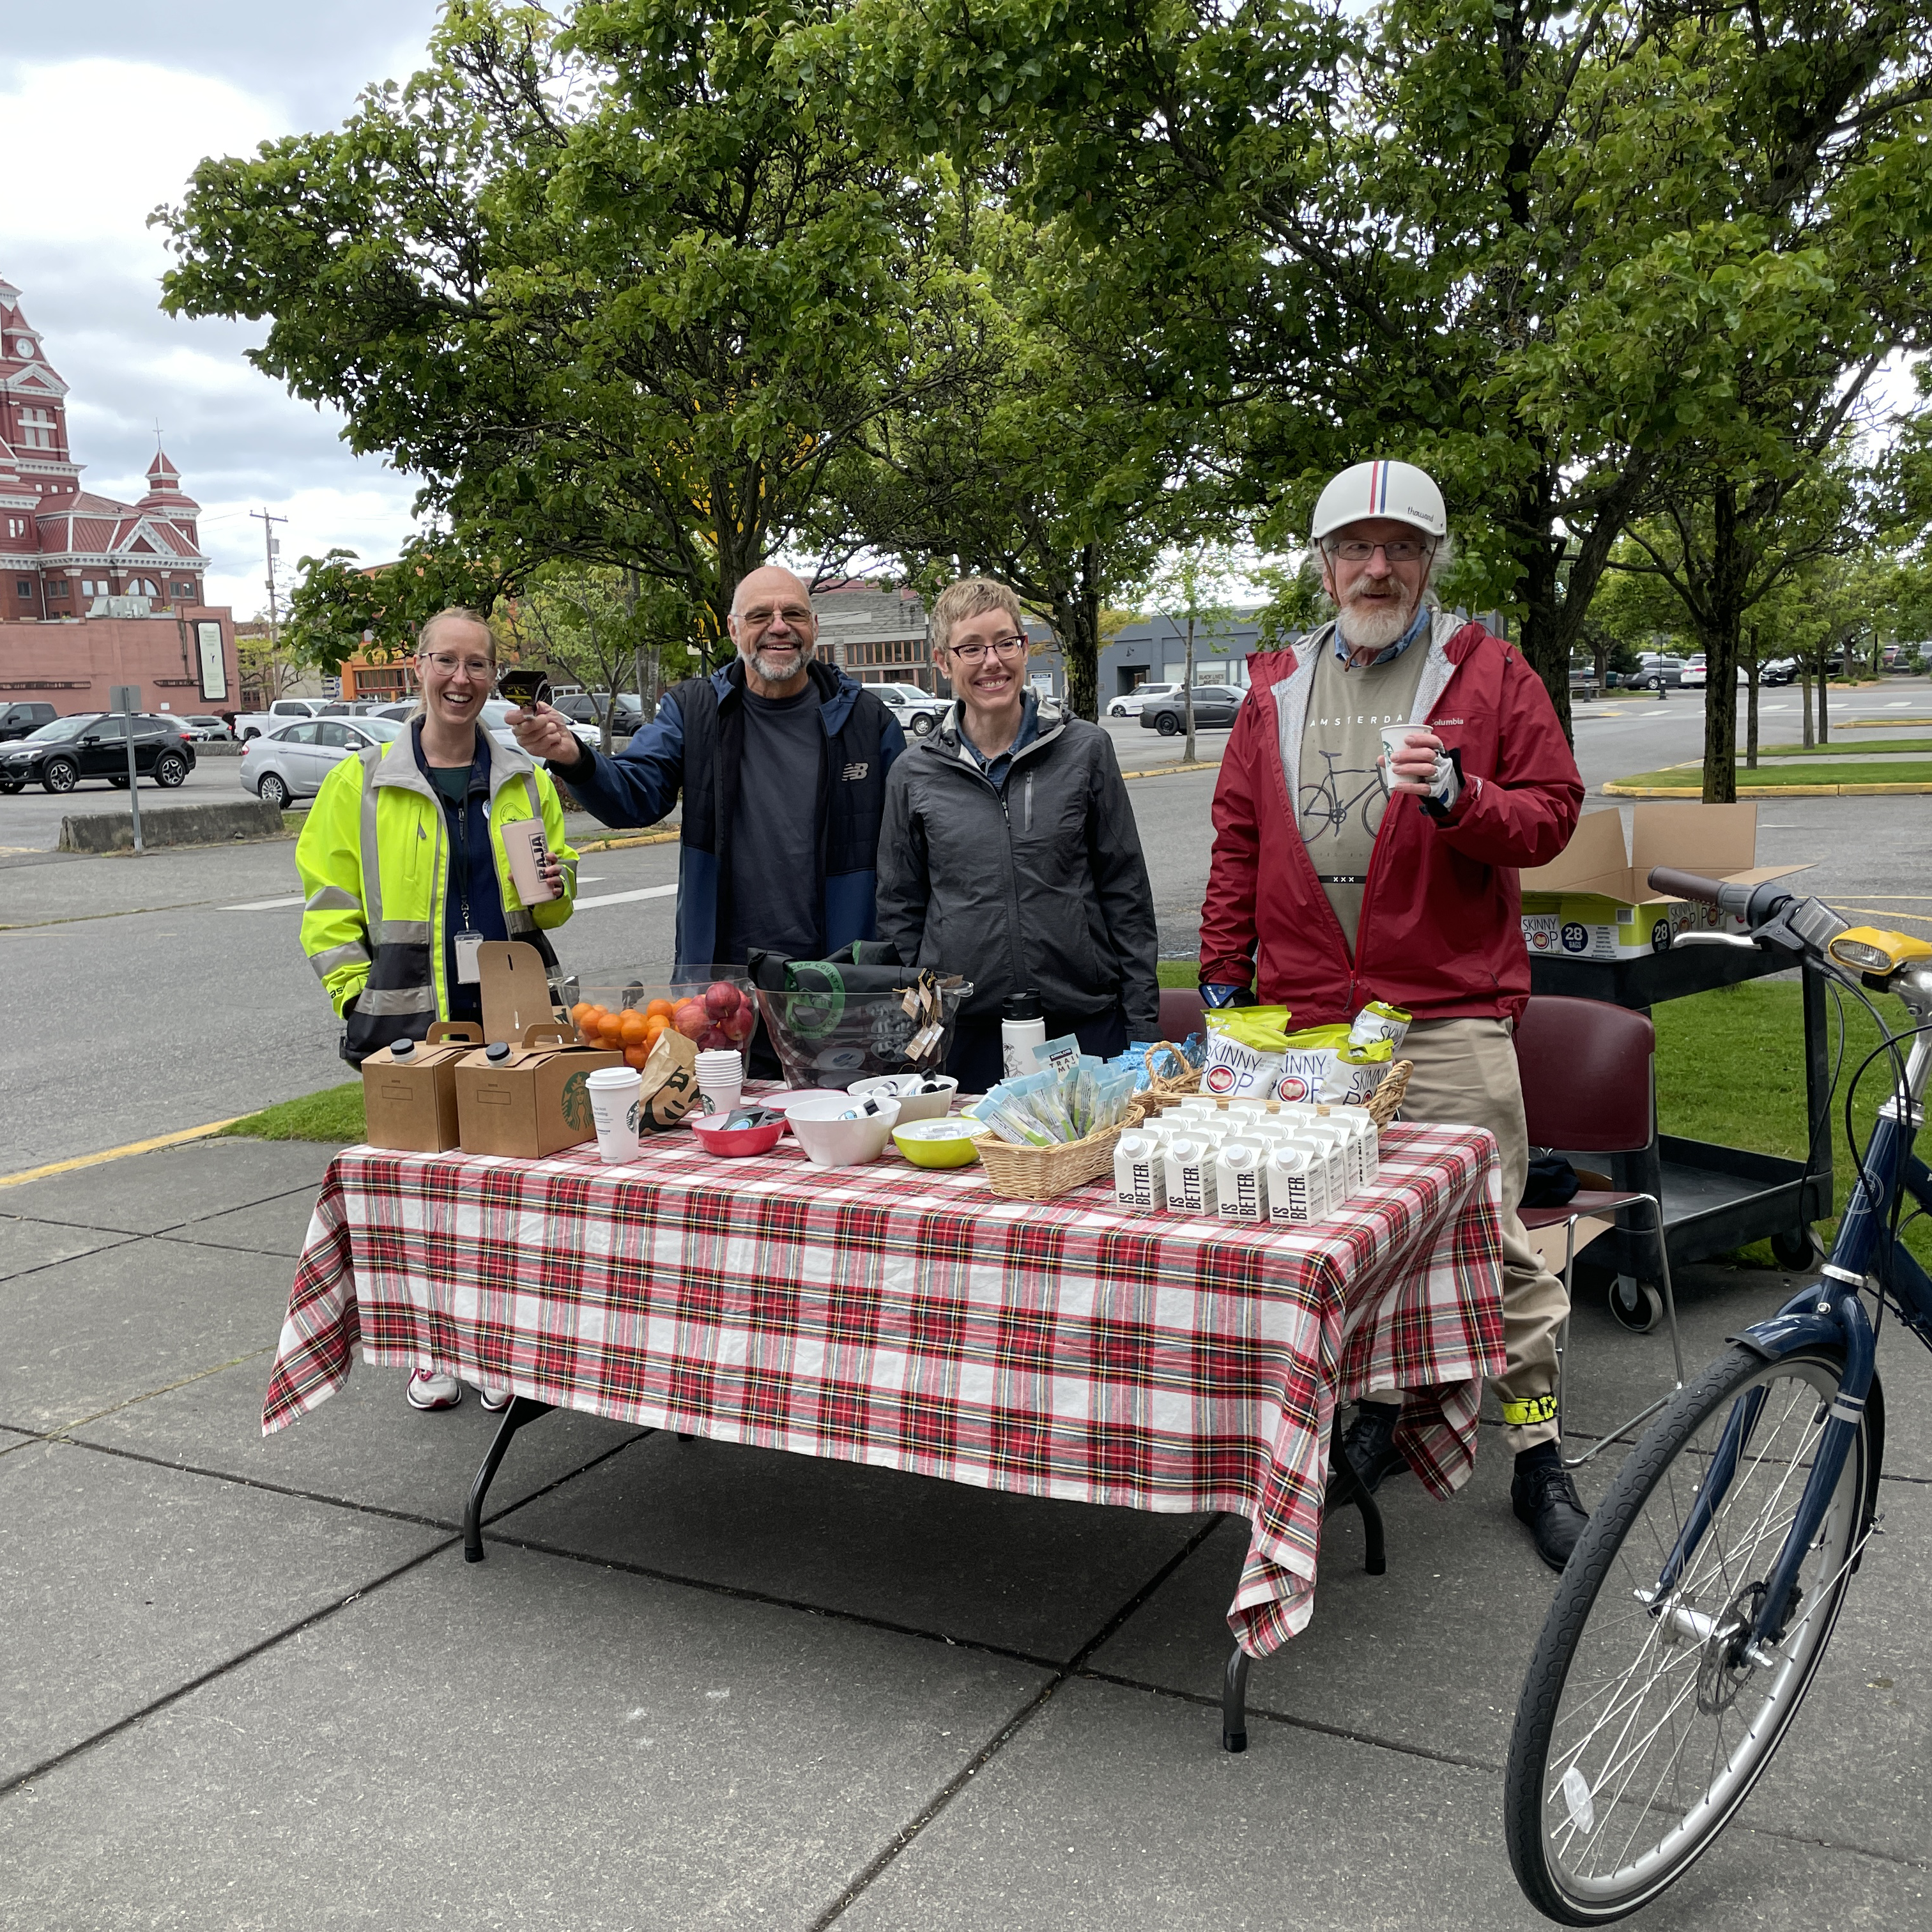 Four people including a cyclist with helmet standing behind a table with snacks.